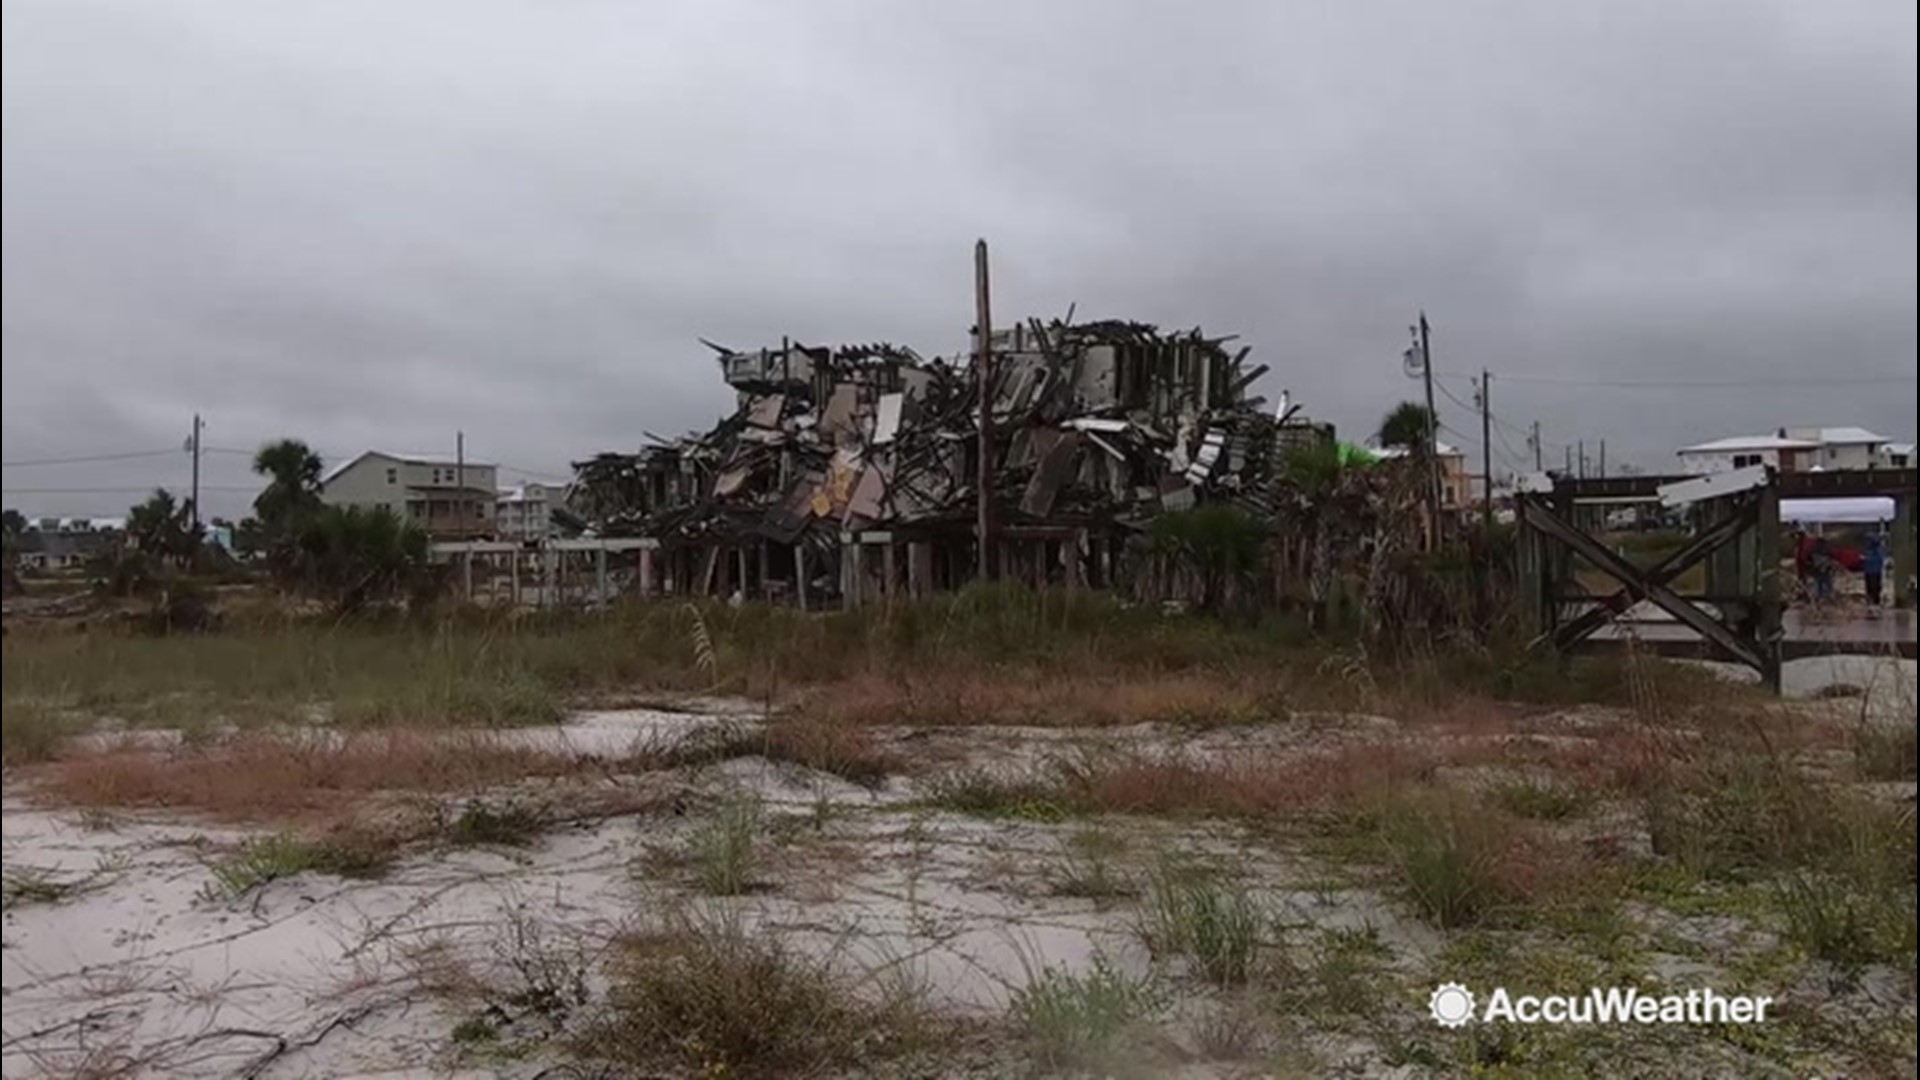 The city of Mexico Beach, Florida, still bears the scars from when the destructive Hurricane Michael hit it on Oct. 10, 2018. With Tropical Storm Nestor on the way to hit the city with more rain on Oct. 18, 2019, there is the potential for the city to suffer further damage.